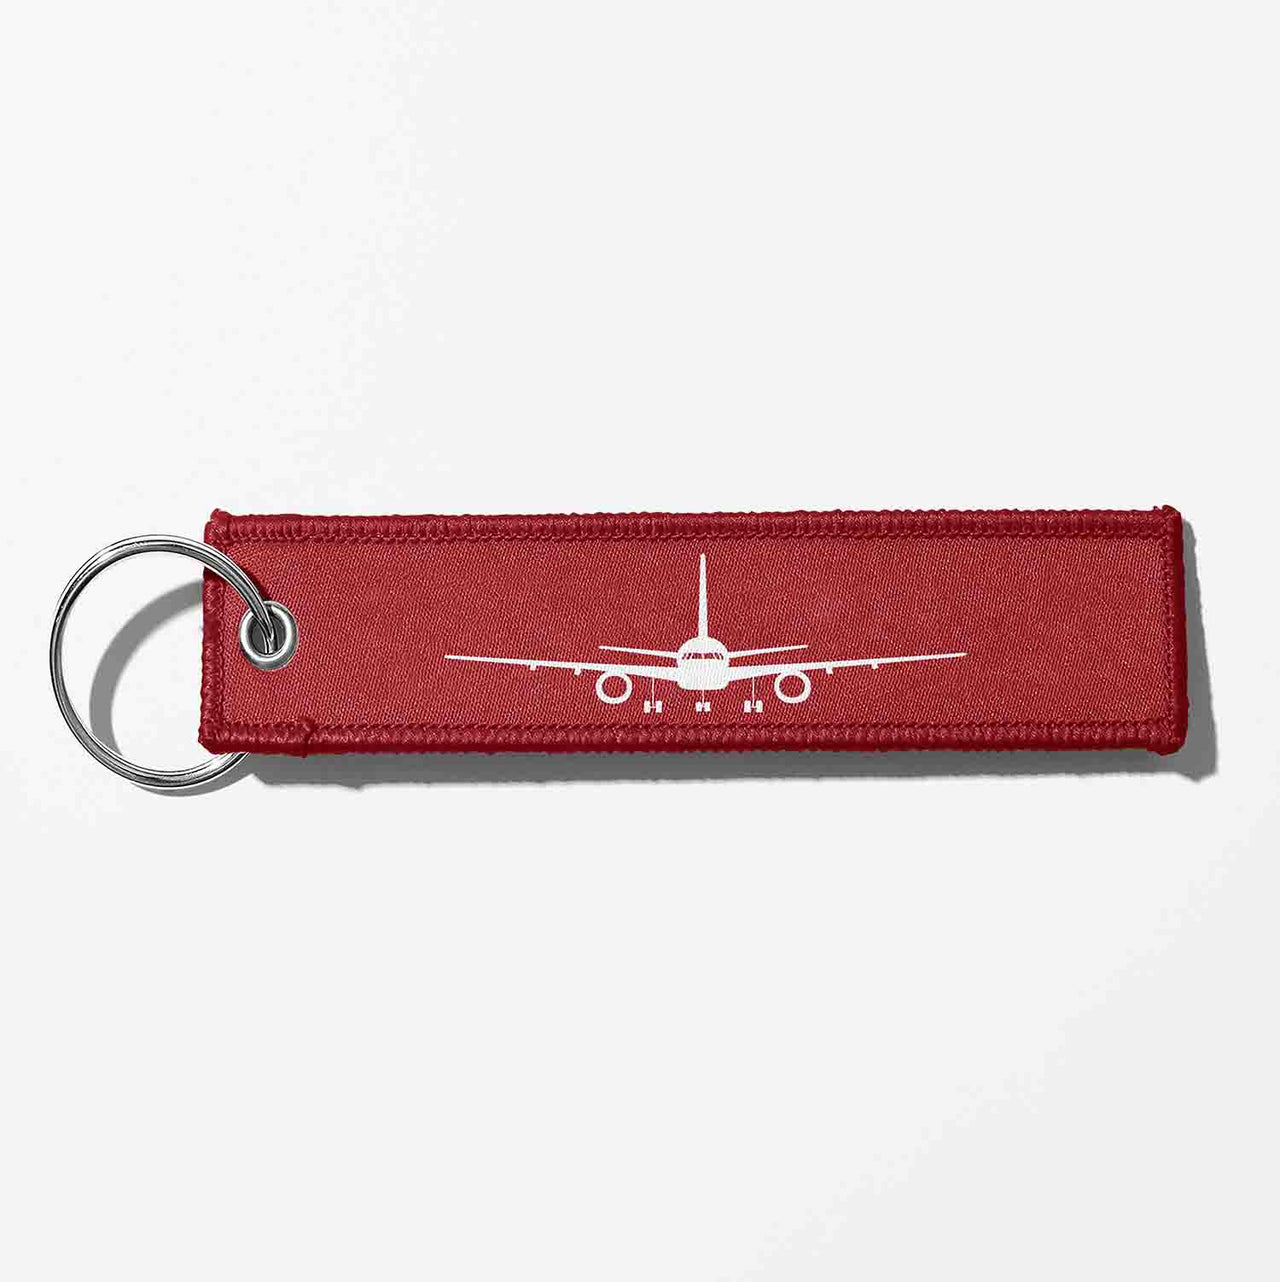 Boeing 757 Silhouette Designed Key Chains